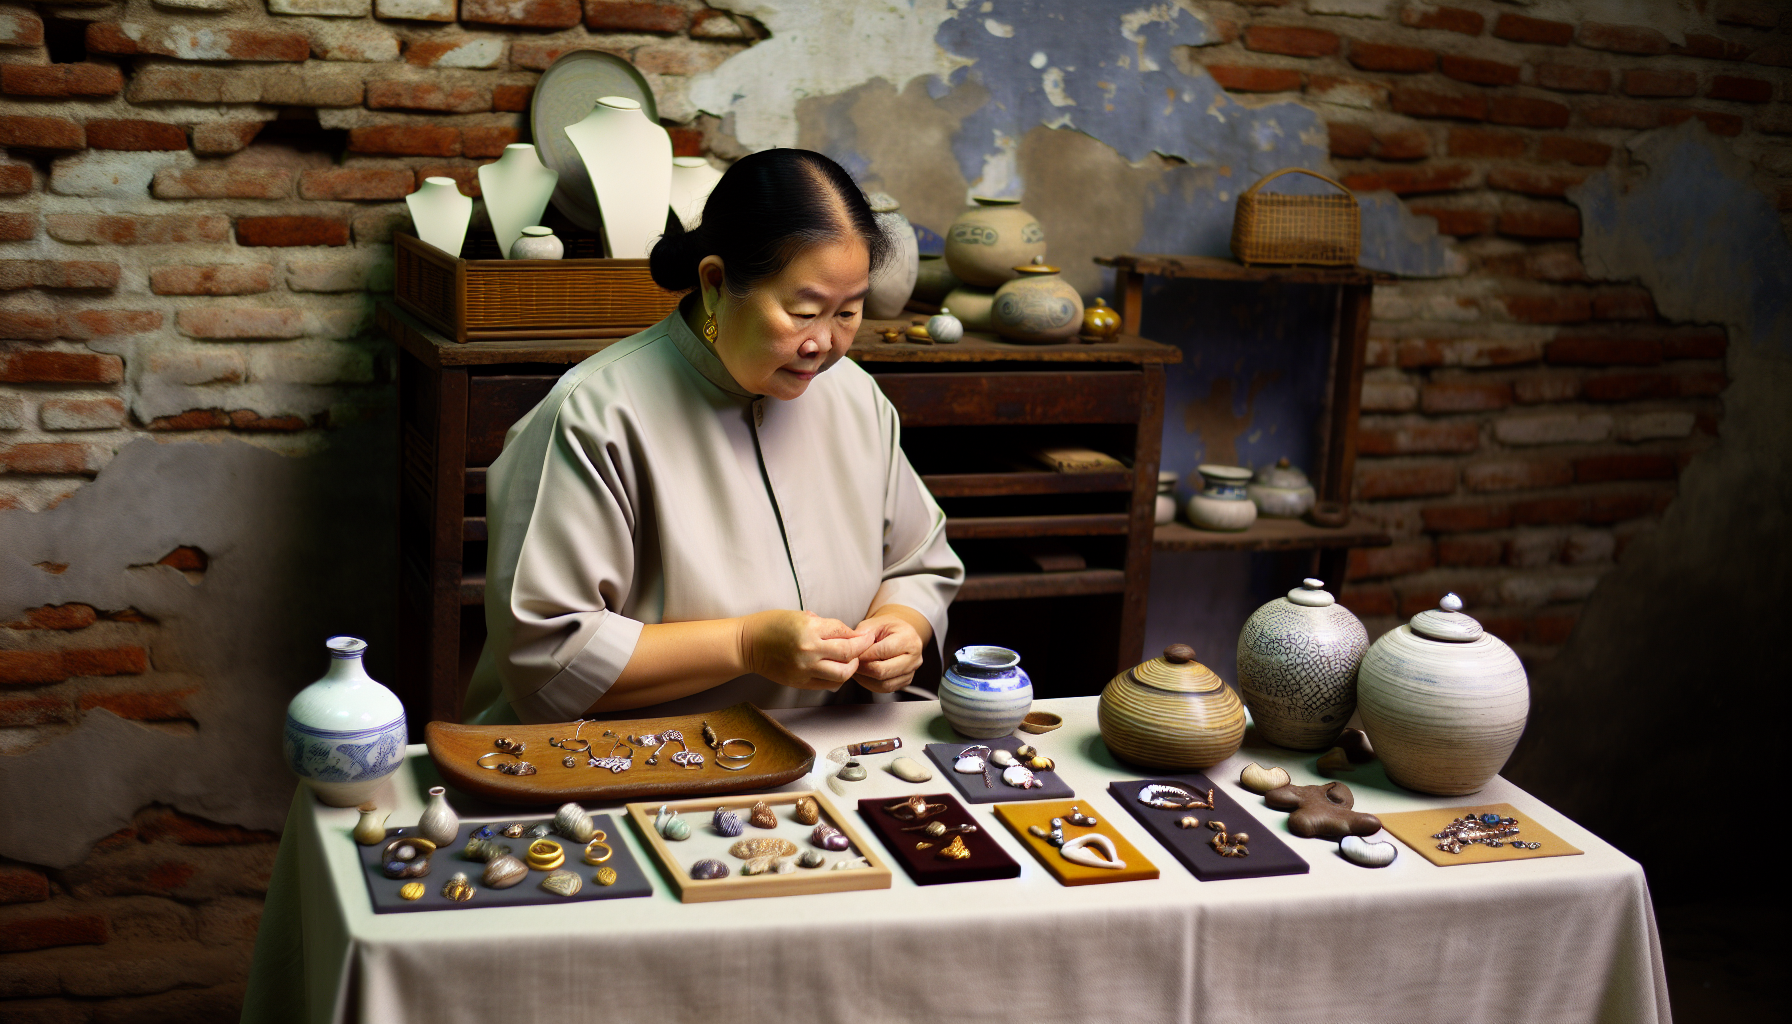 Local artisan displaying handcrafted pottery and jewelry